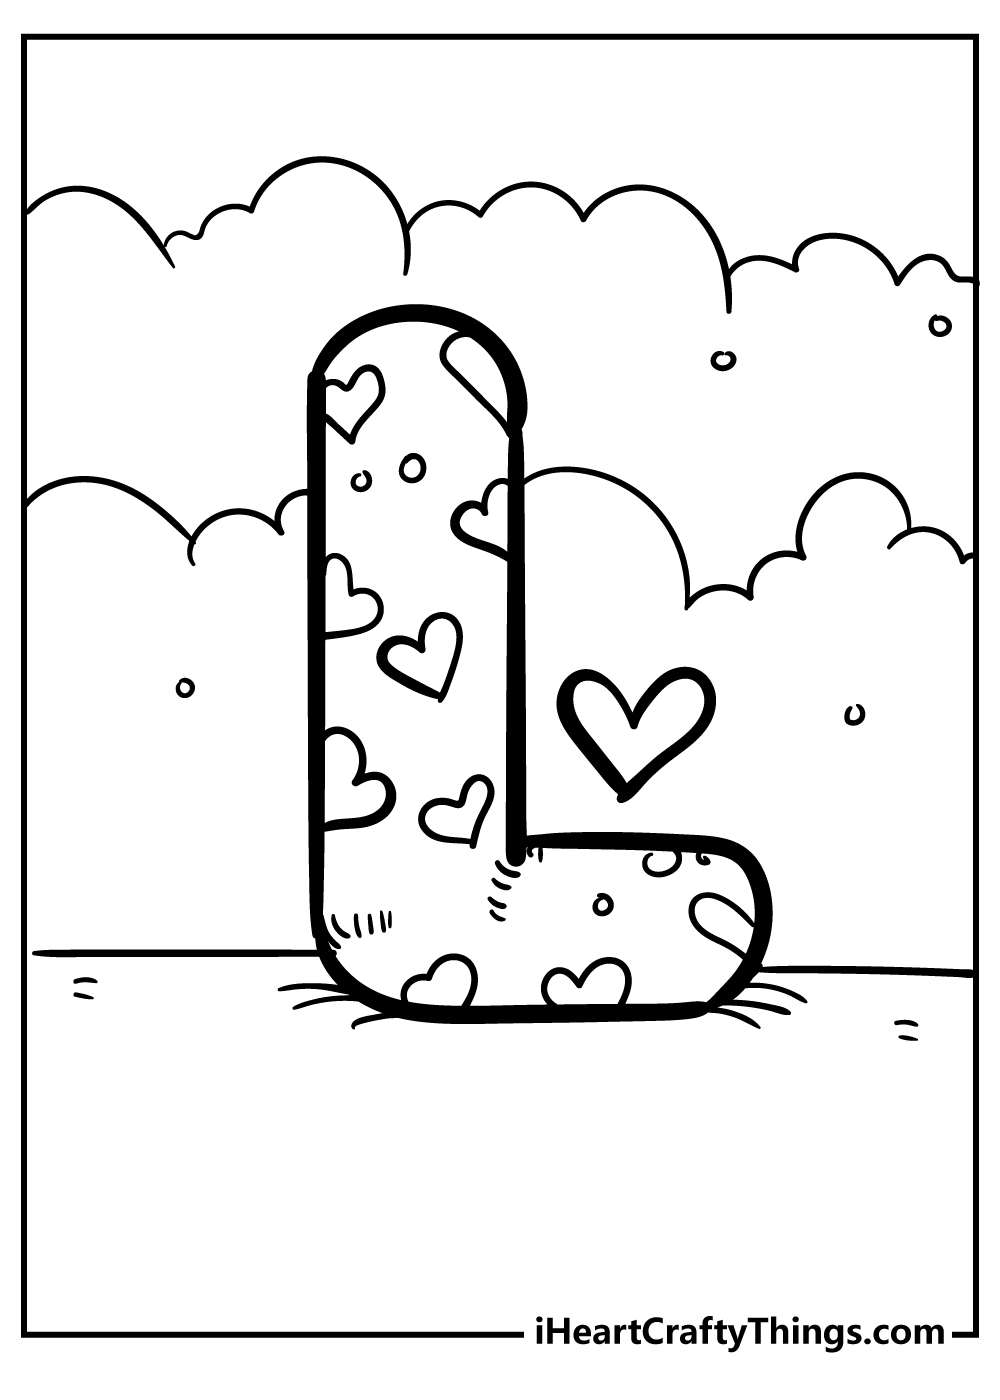 Letter L Coloring Pages for kids free download